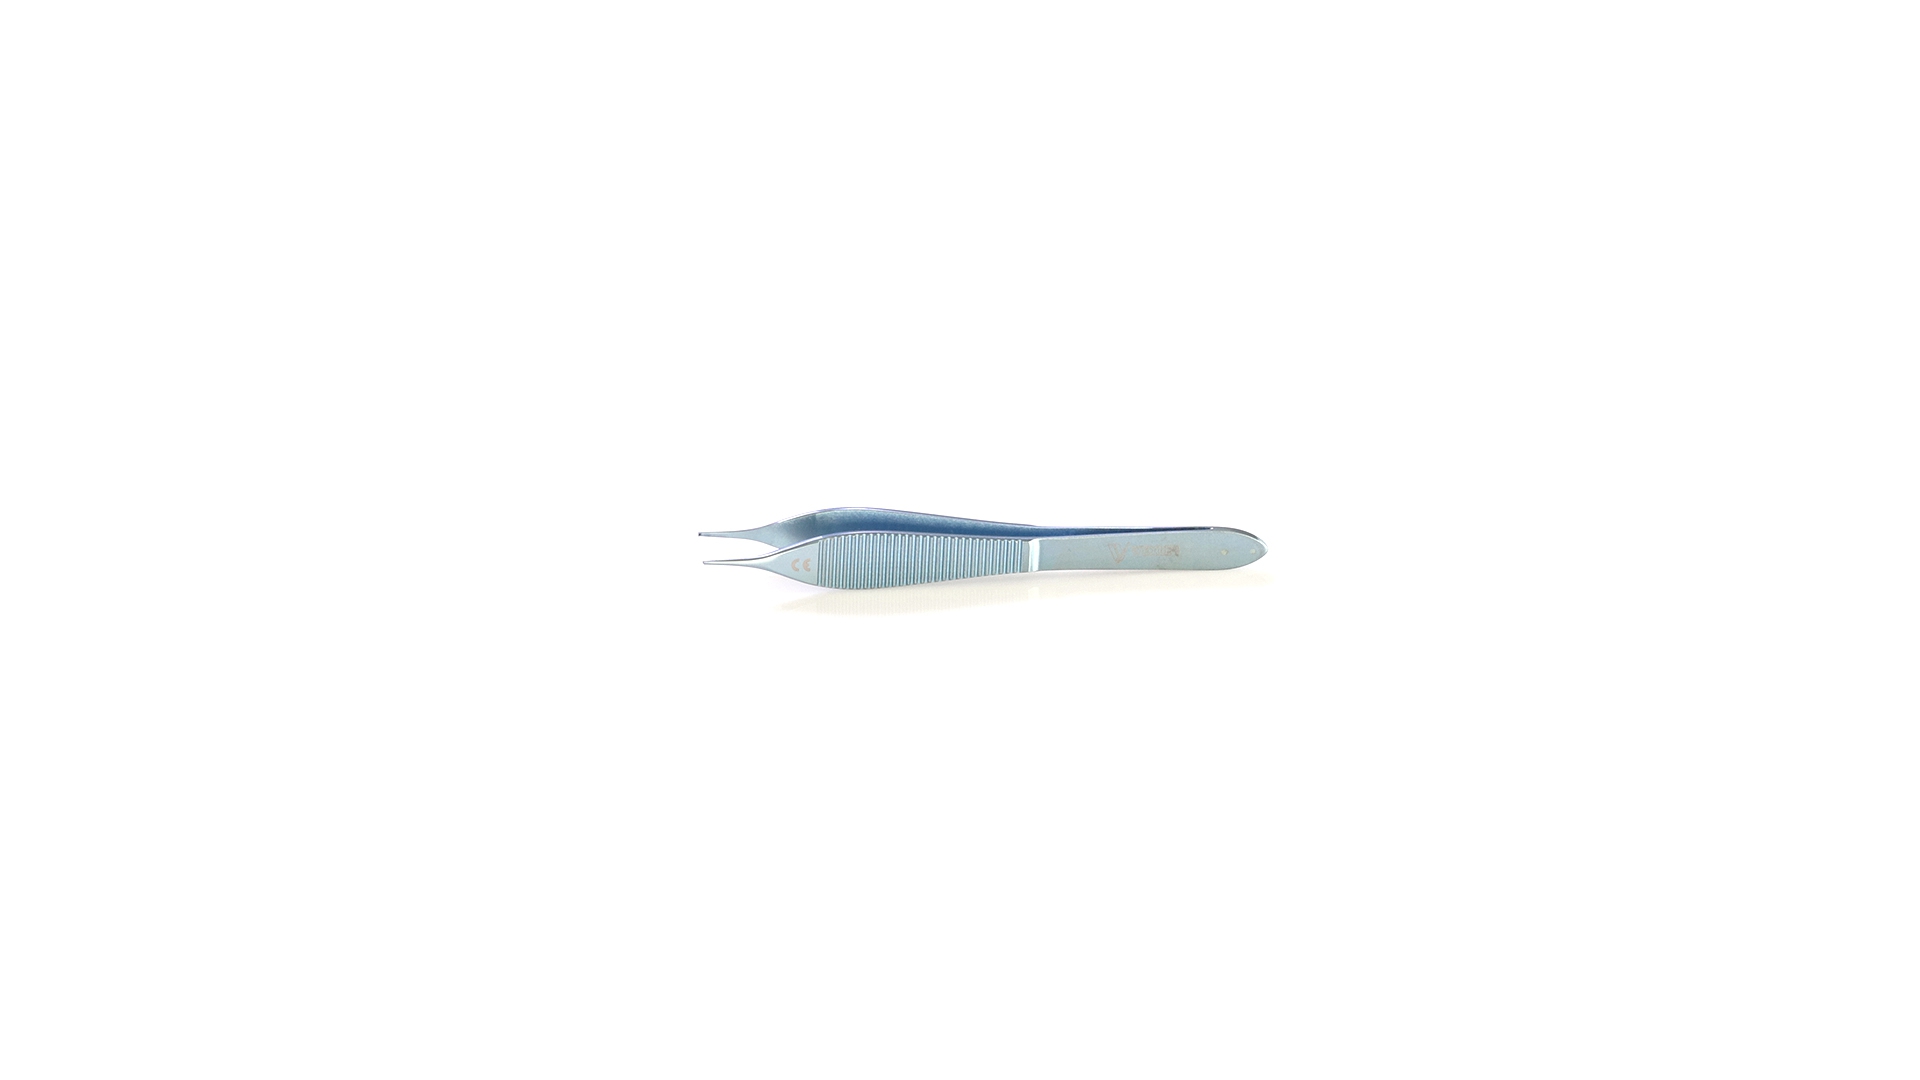 Micro Adson Tissue Forceps - Straight Delicate tips w/1x2 teeth